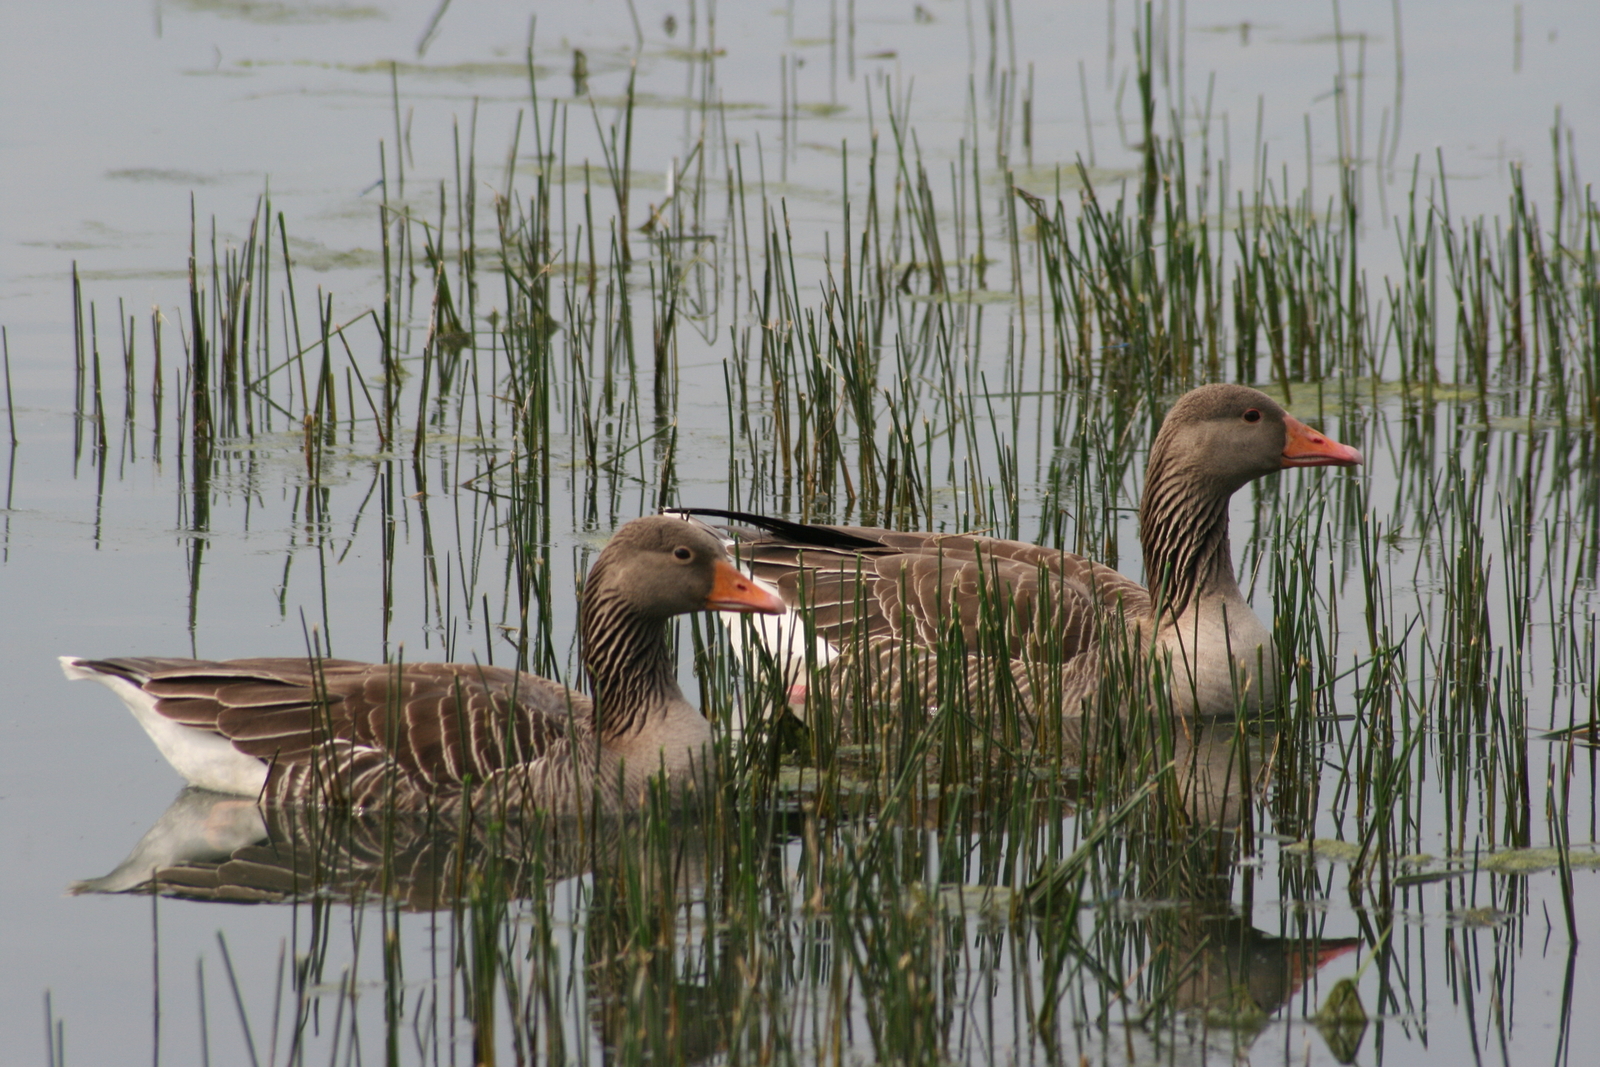 A pair of greylag geese in England. Image Credit: © Pkemp | Dreamstime.com.